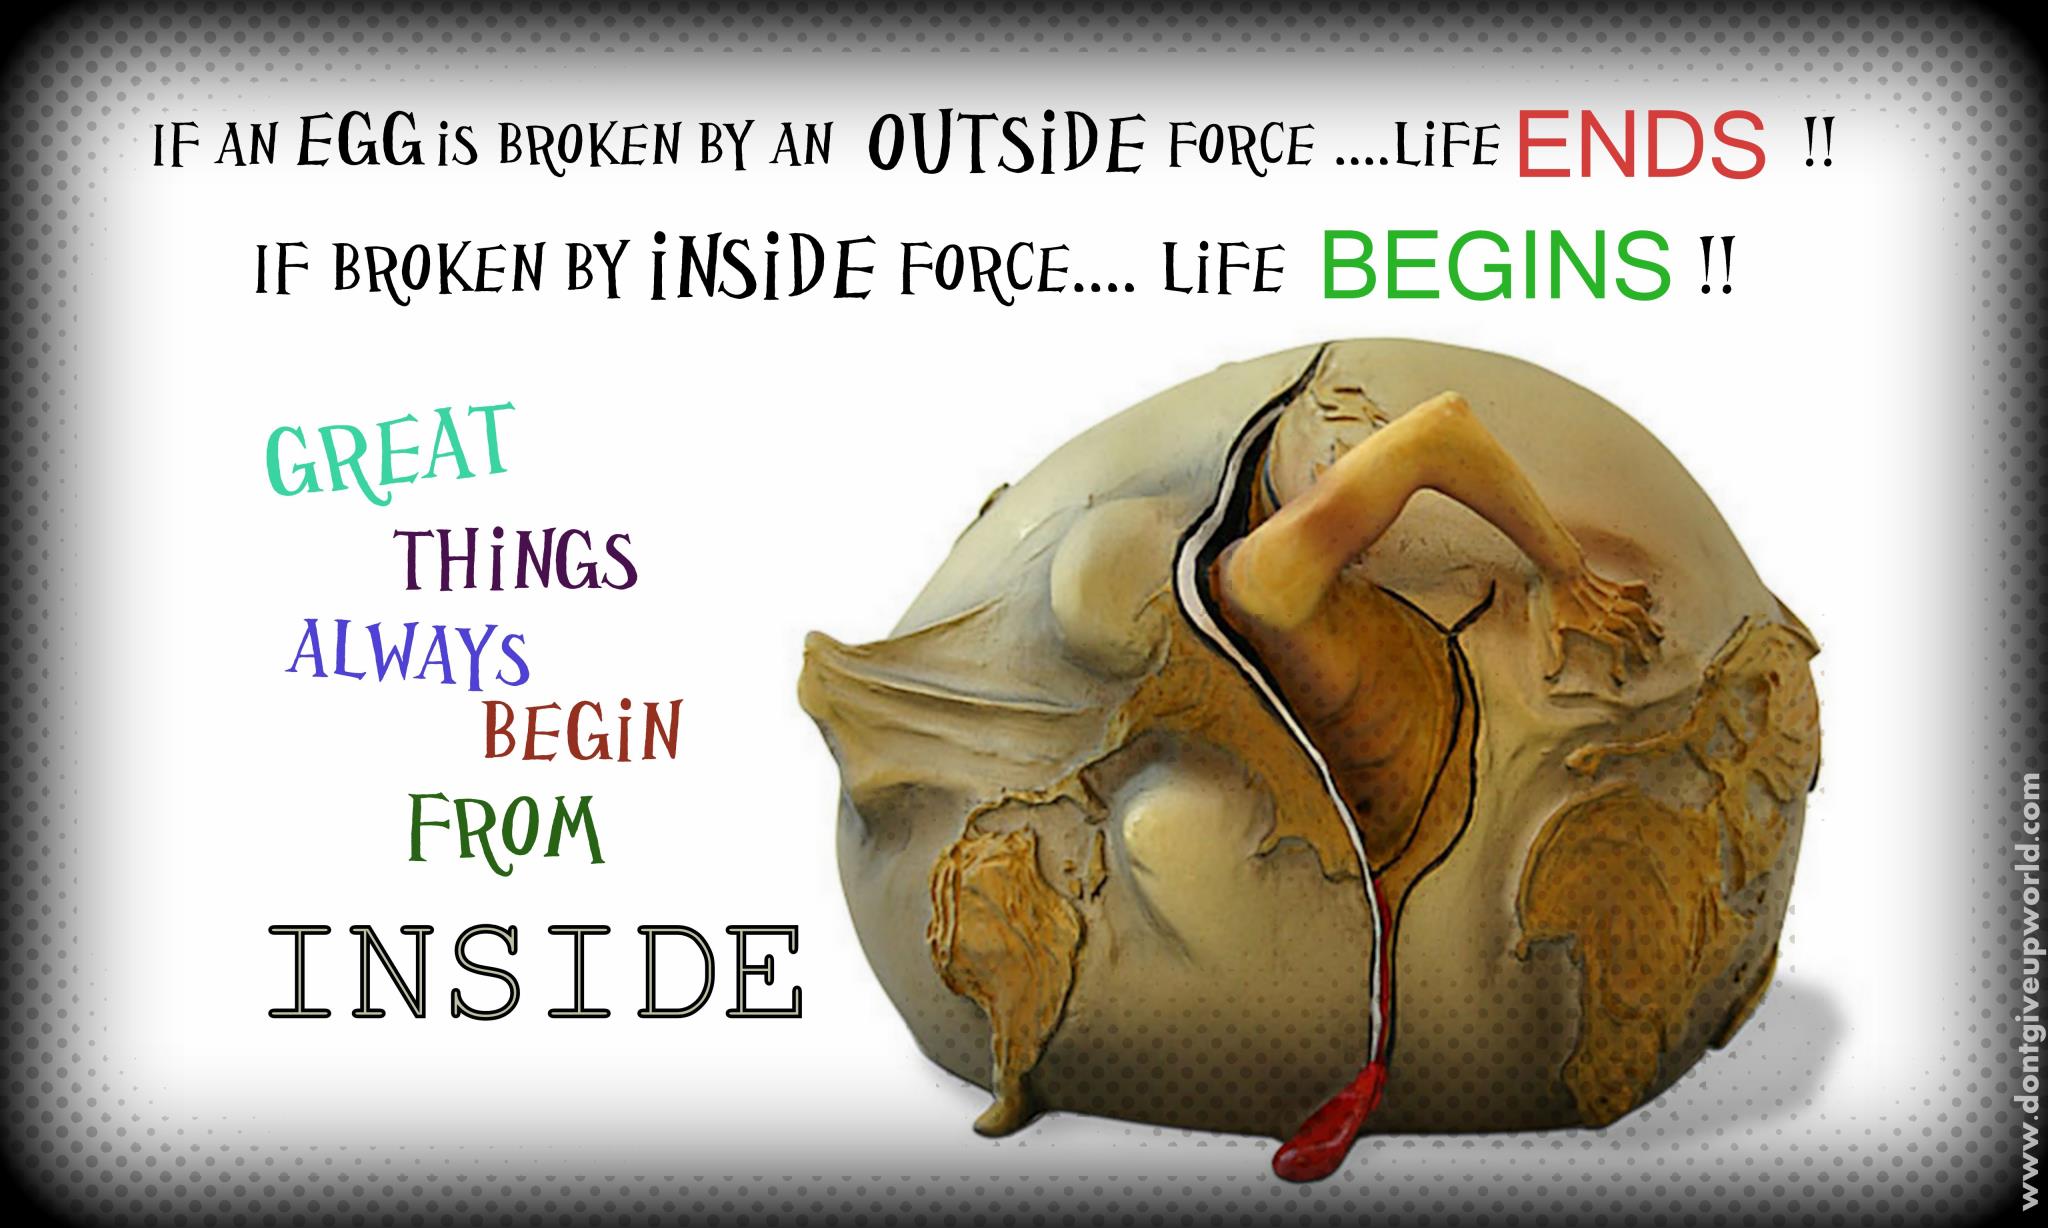 Our life beginning and always. If an Egg is broken by inside Force Life begins. Our Life beginnings and always. Broken inside.